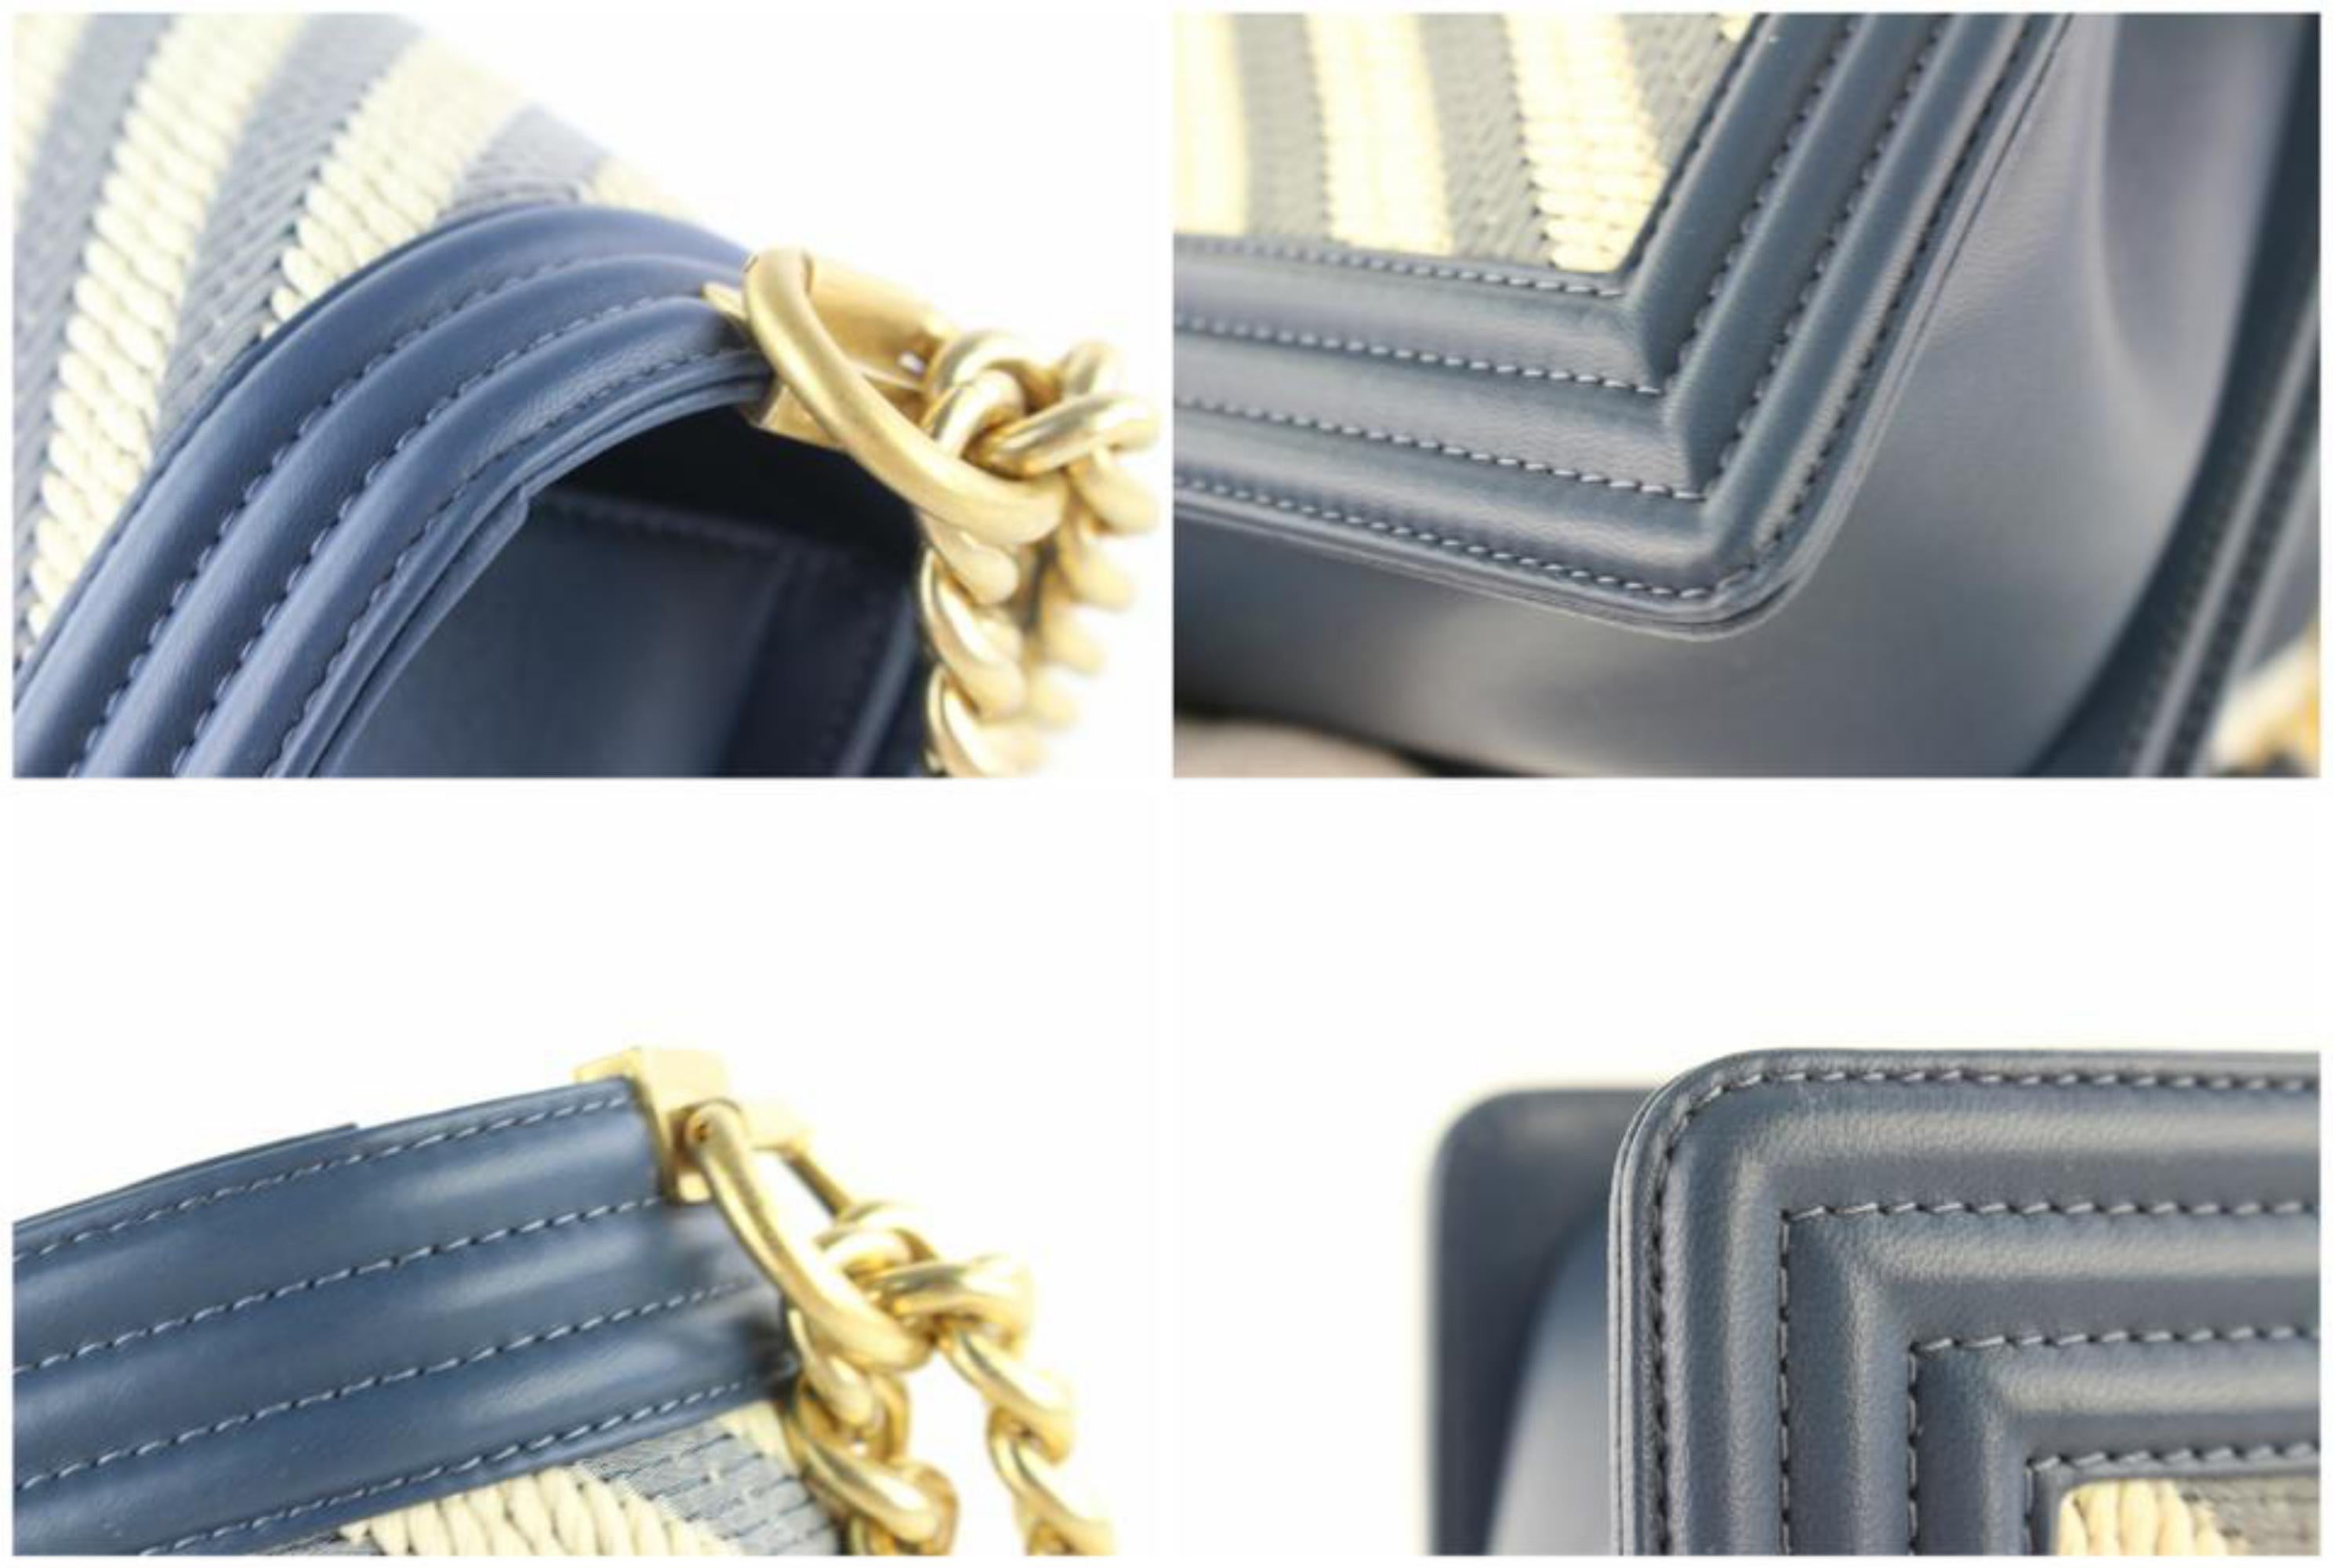 Chanel Boy (Rare) Limited Edition Chevron 2cz1812 Blue Leather Cross Body Bag For Sale 6